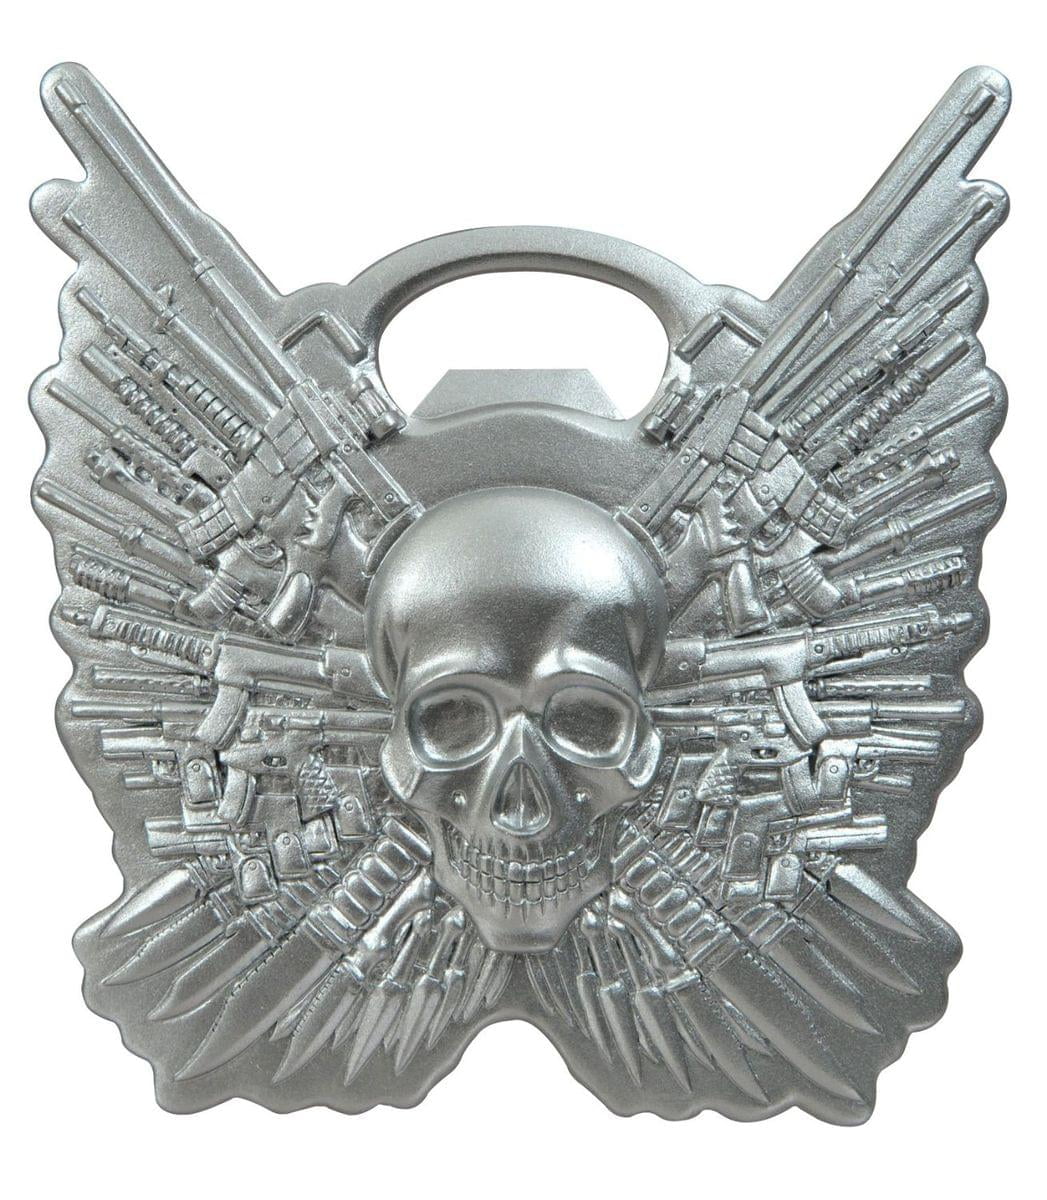 NEW IN BOX THE EXPENDABLES METAL BOTTLE OPENER 4 INCHES SKULL AND GUNS 